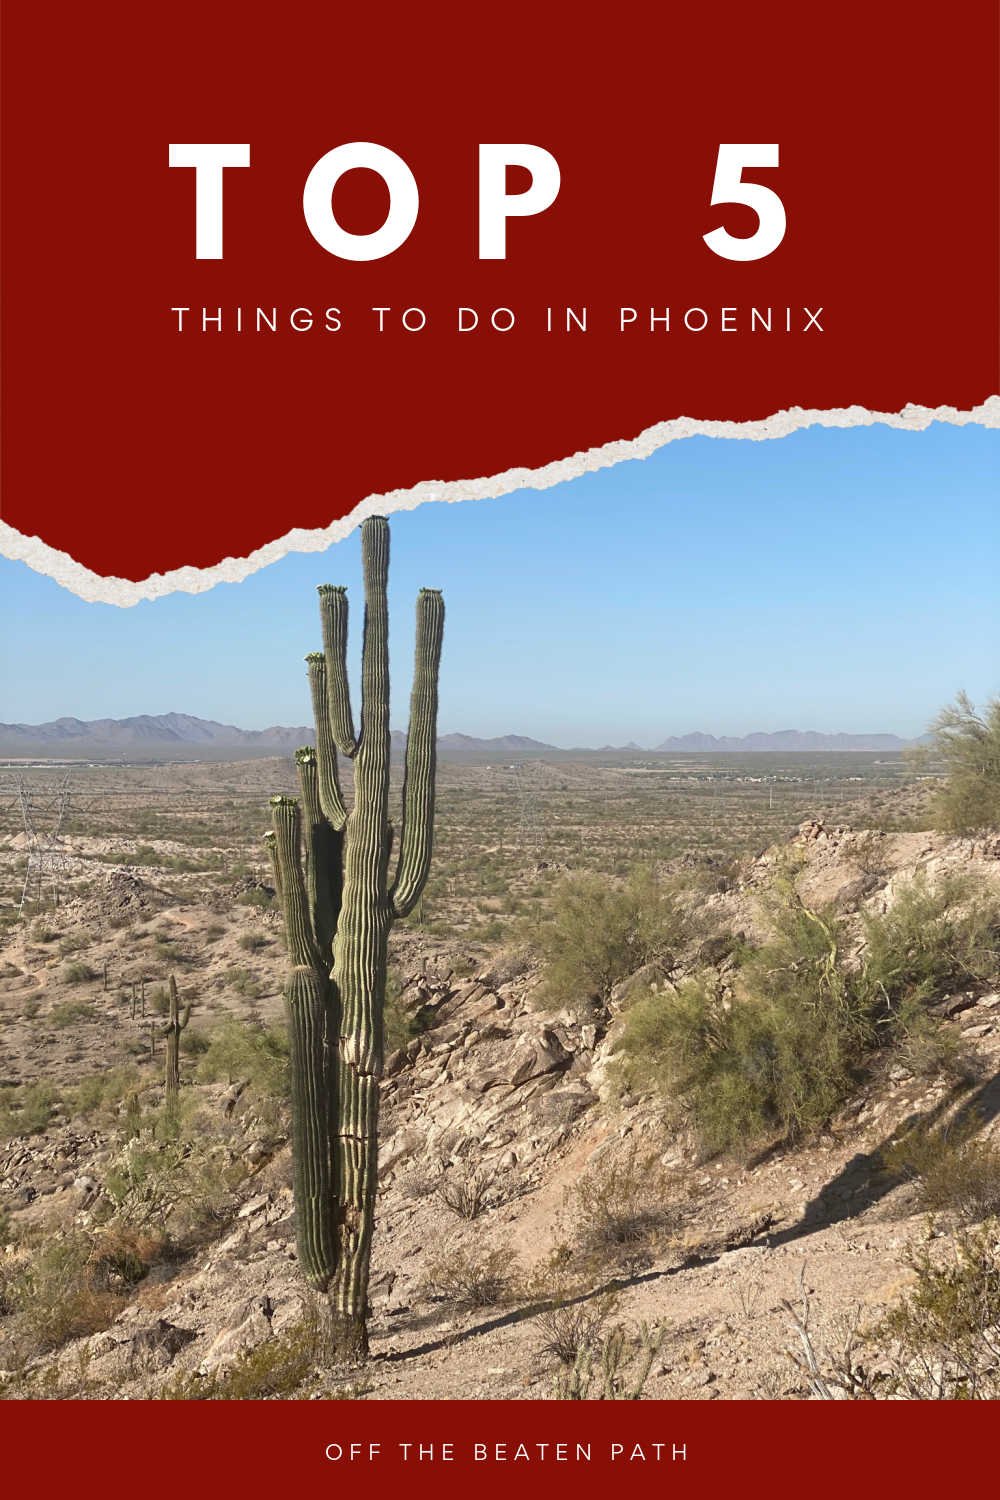 TOP 5 THINGS TO DO IN PHOENIX